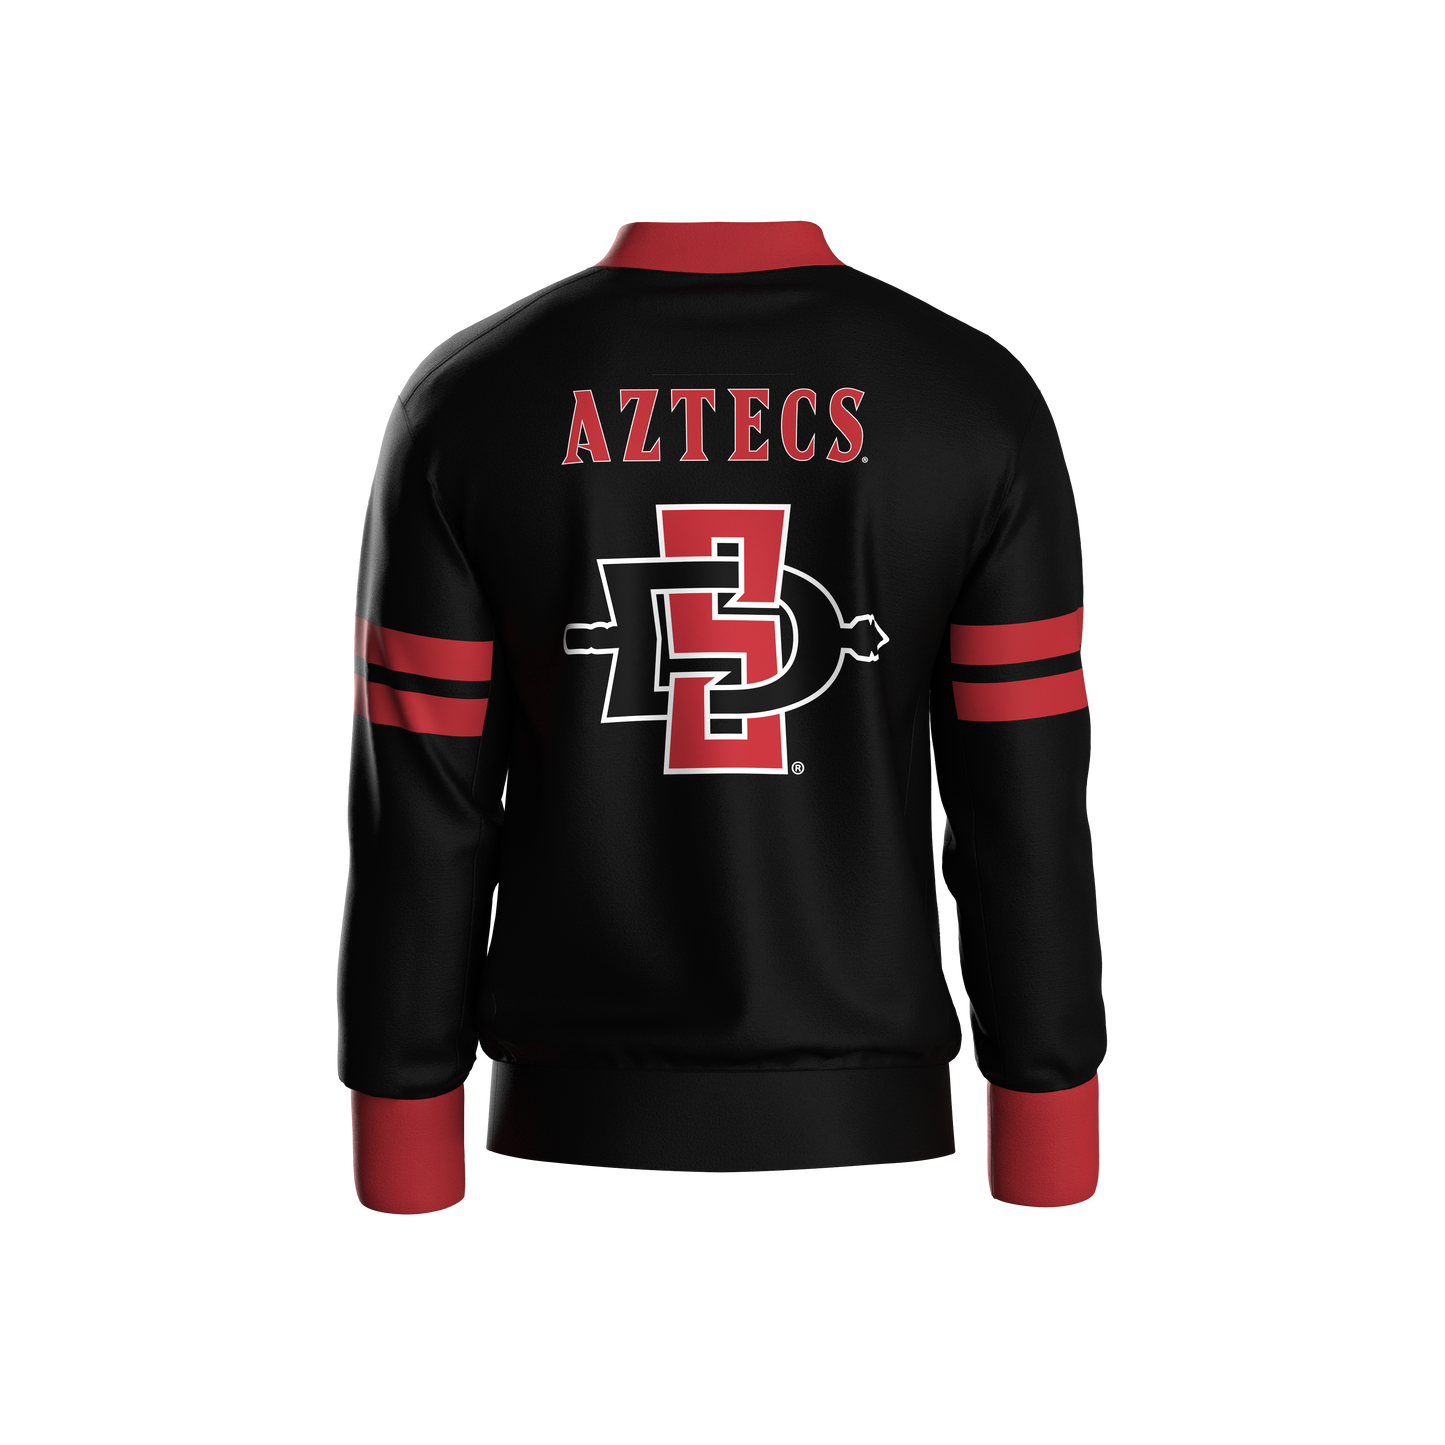 San Diego State University Away Pullover (adult)